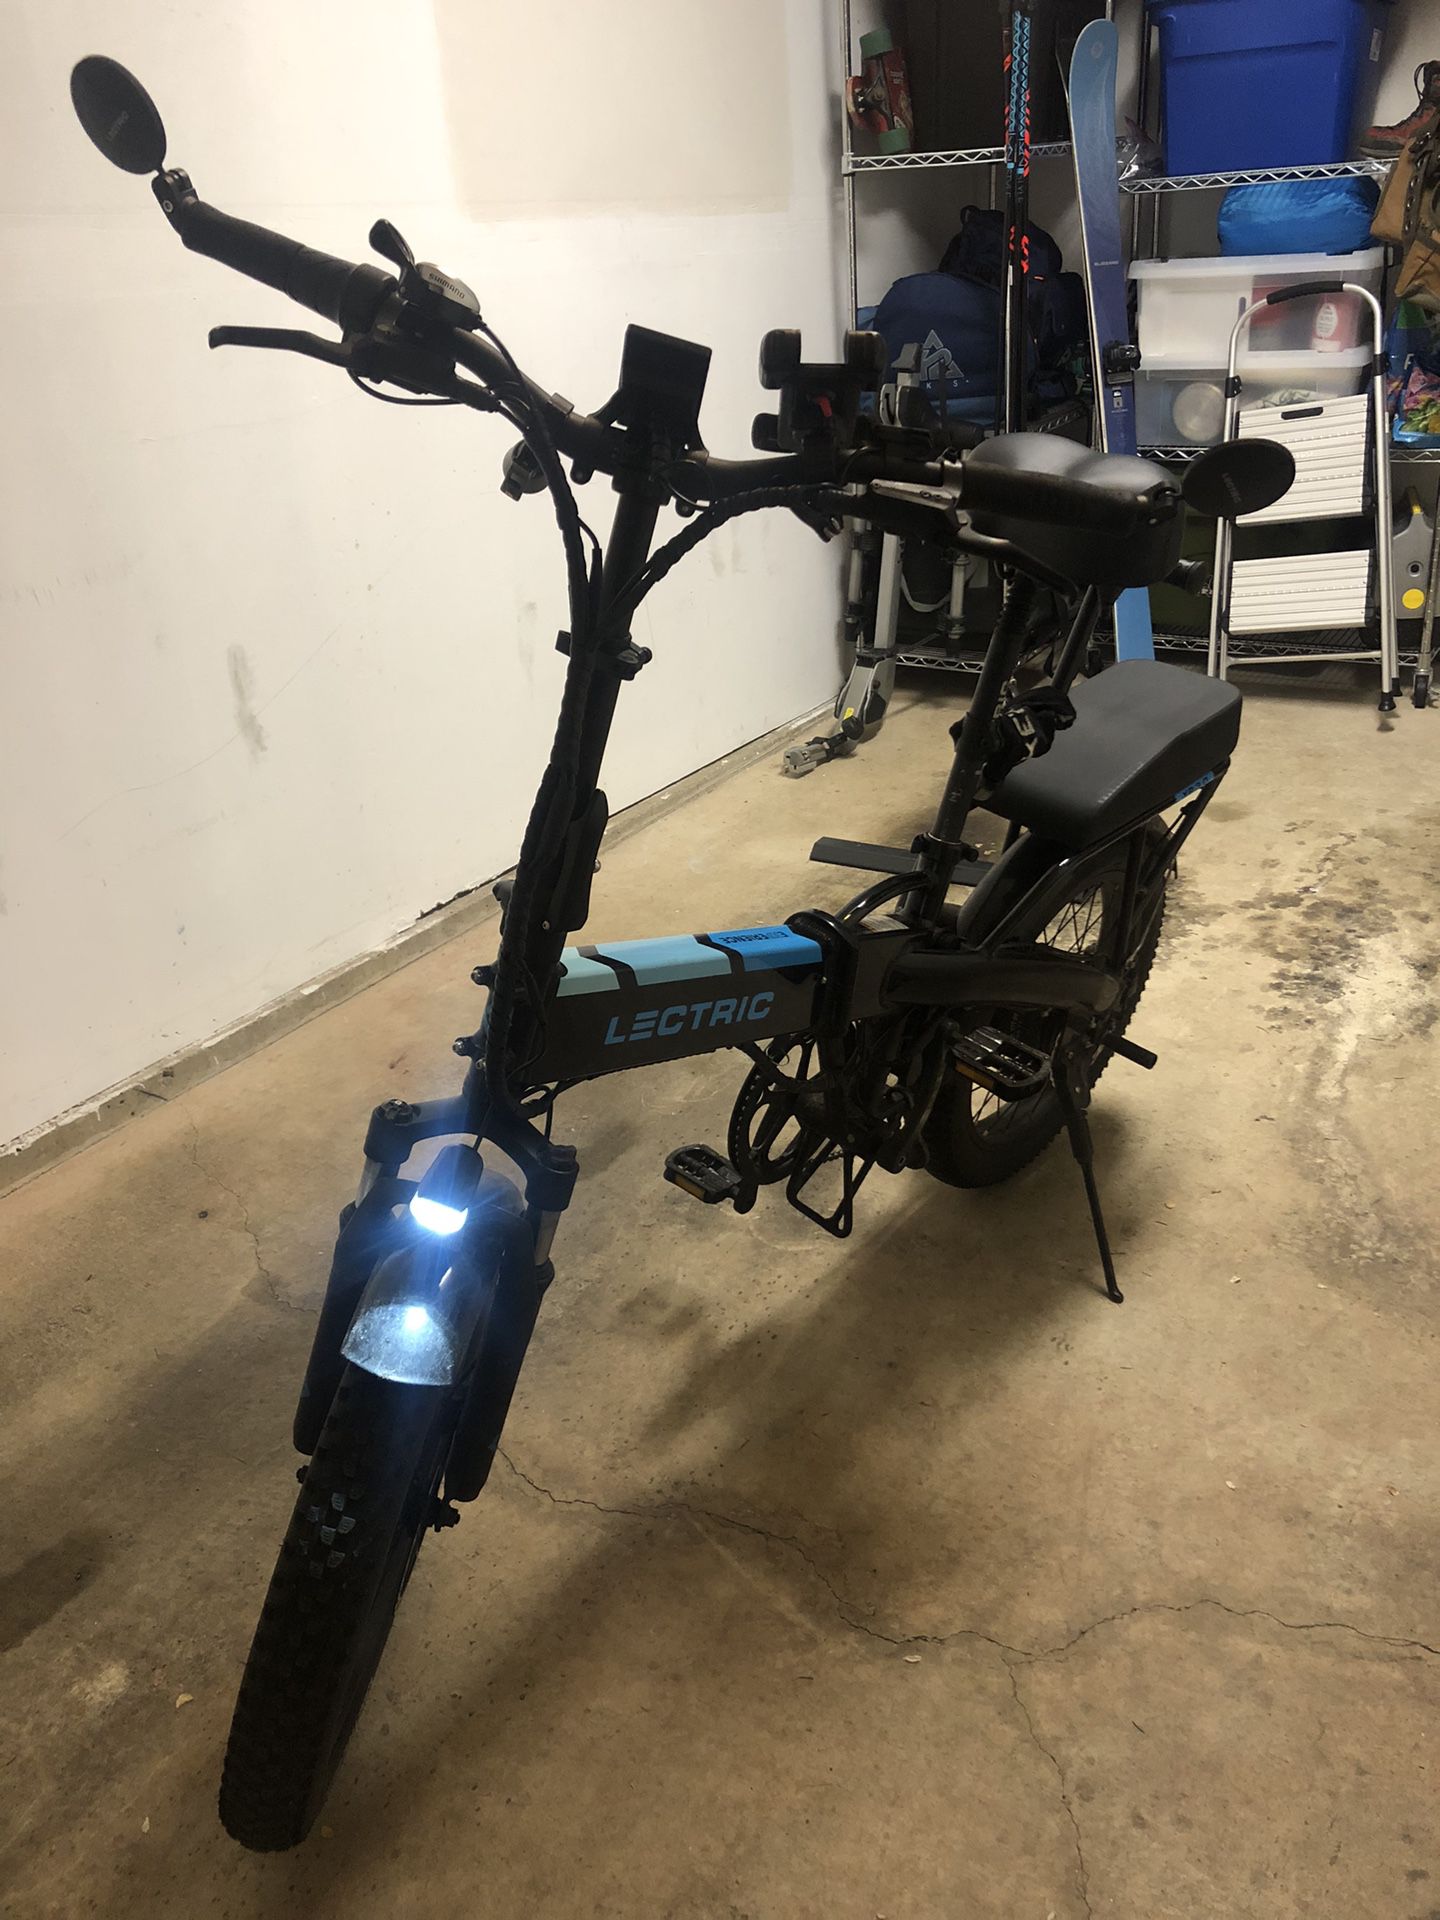 Lectric XP 3.0 Long Range including Comfort and Passenger Upgrades For Sale!